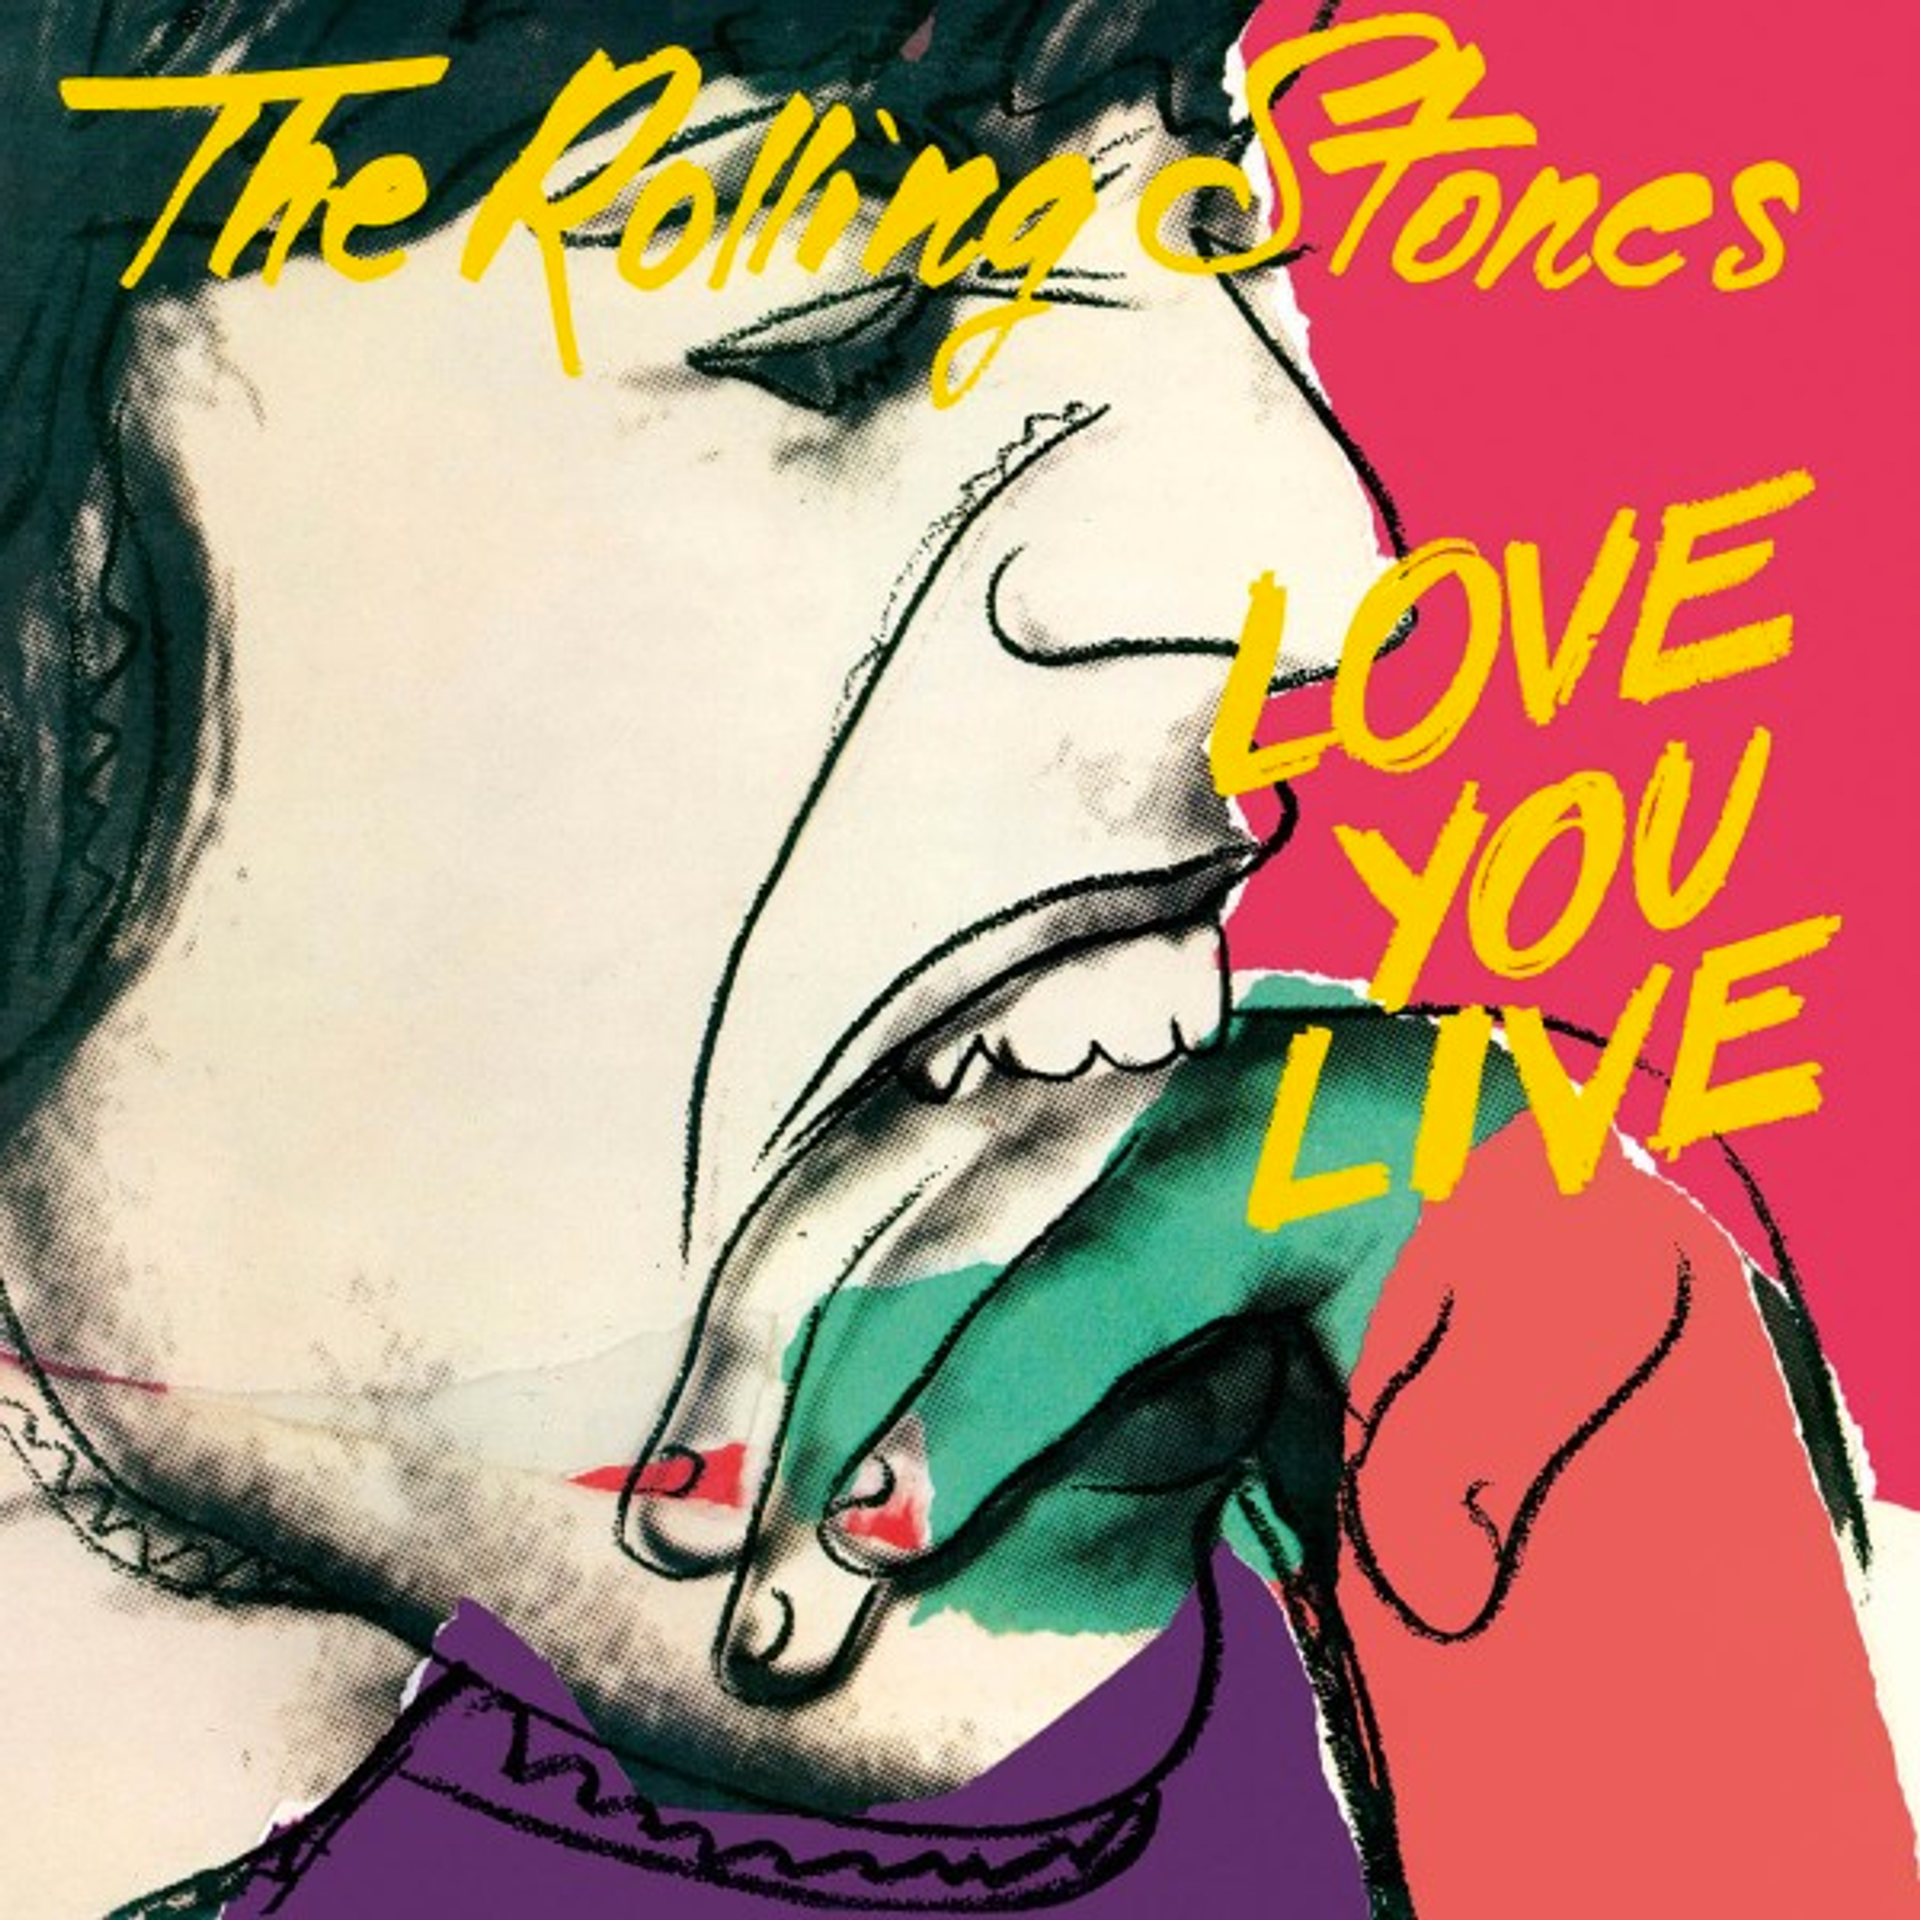 An image of the album cover for Love You Live by the Rolling Stones, showing Mick Jagger playfully biting the hand of a small child. Bright colourblocks are overlaid in his face, which is also outlined in a drawing style.